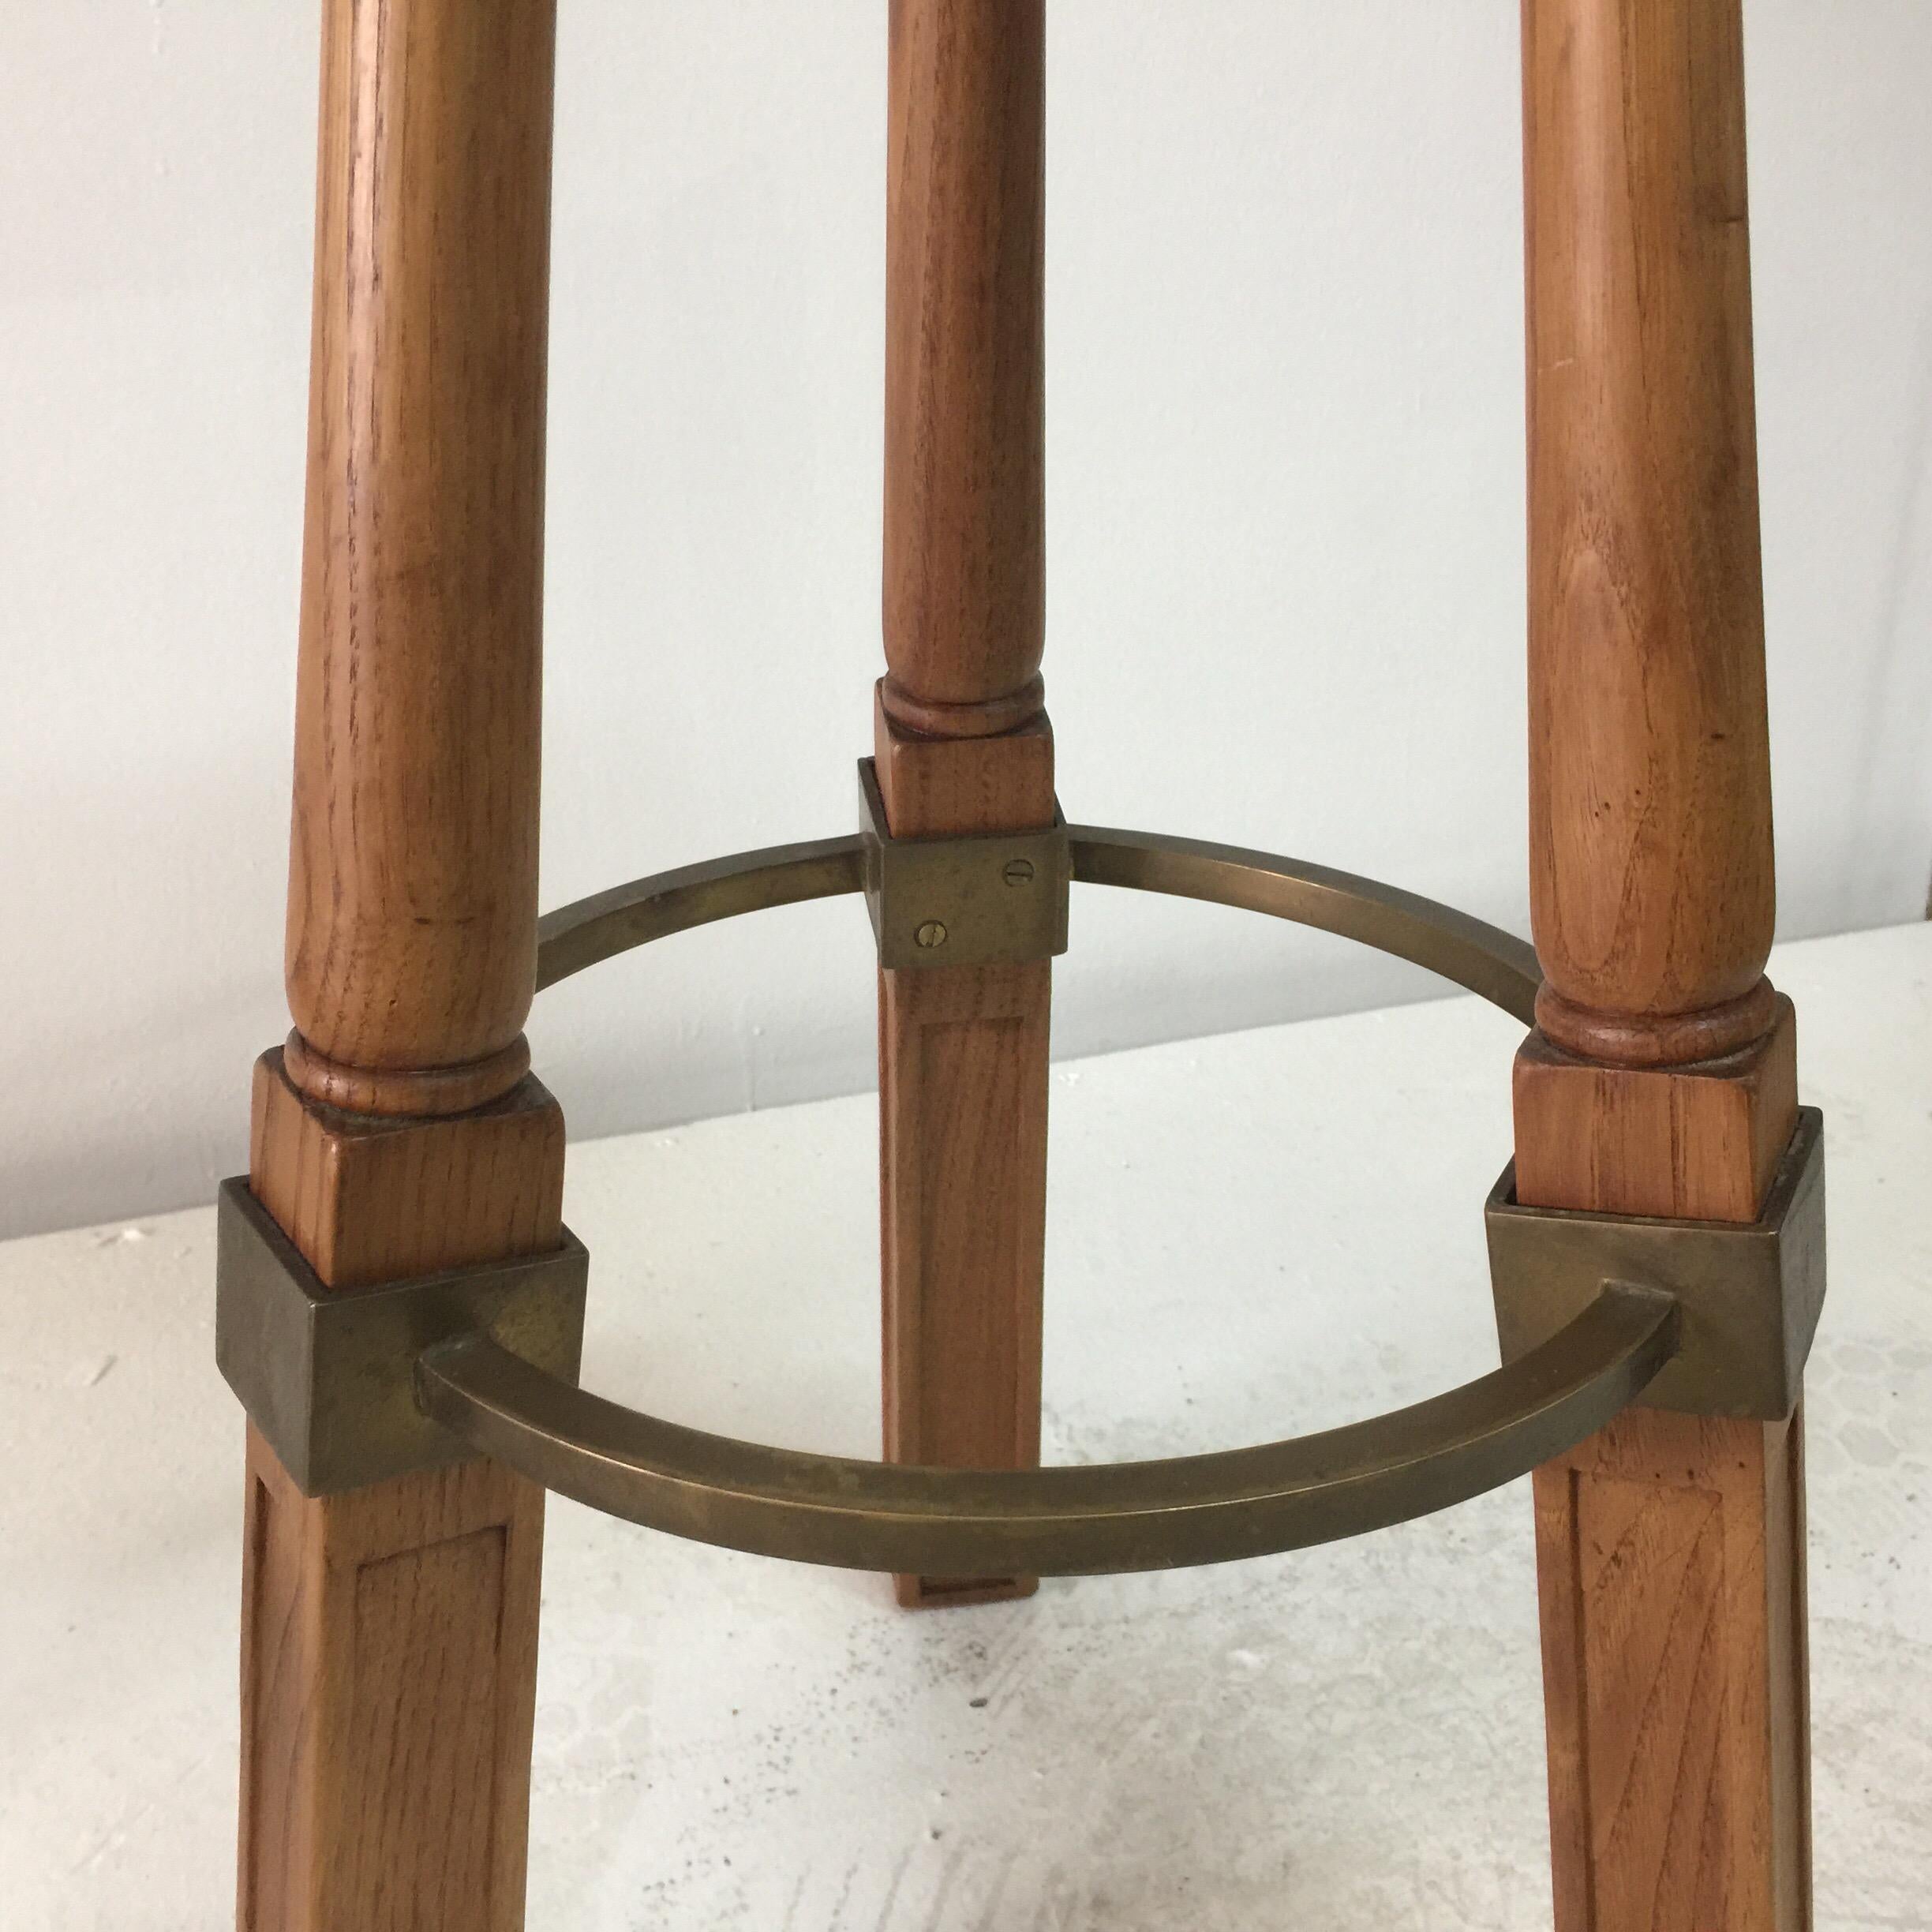 These two (2) standard height bar stools are classic French oak with patinated brass ring foot rest and accents. Sturdy and organic in design - ready to place! Attributed to Jacques Adnet.